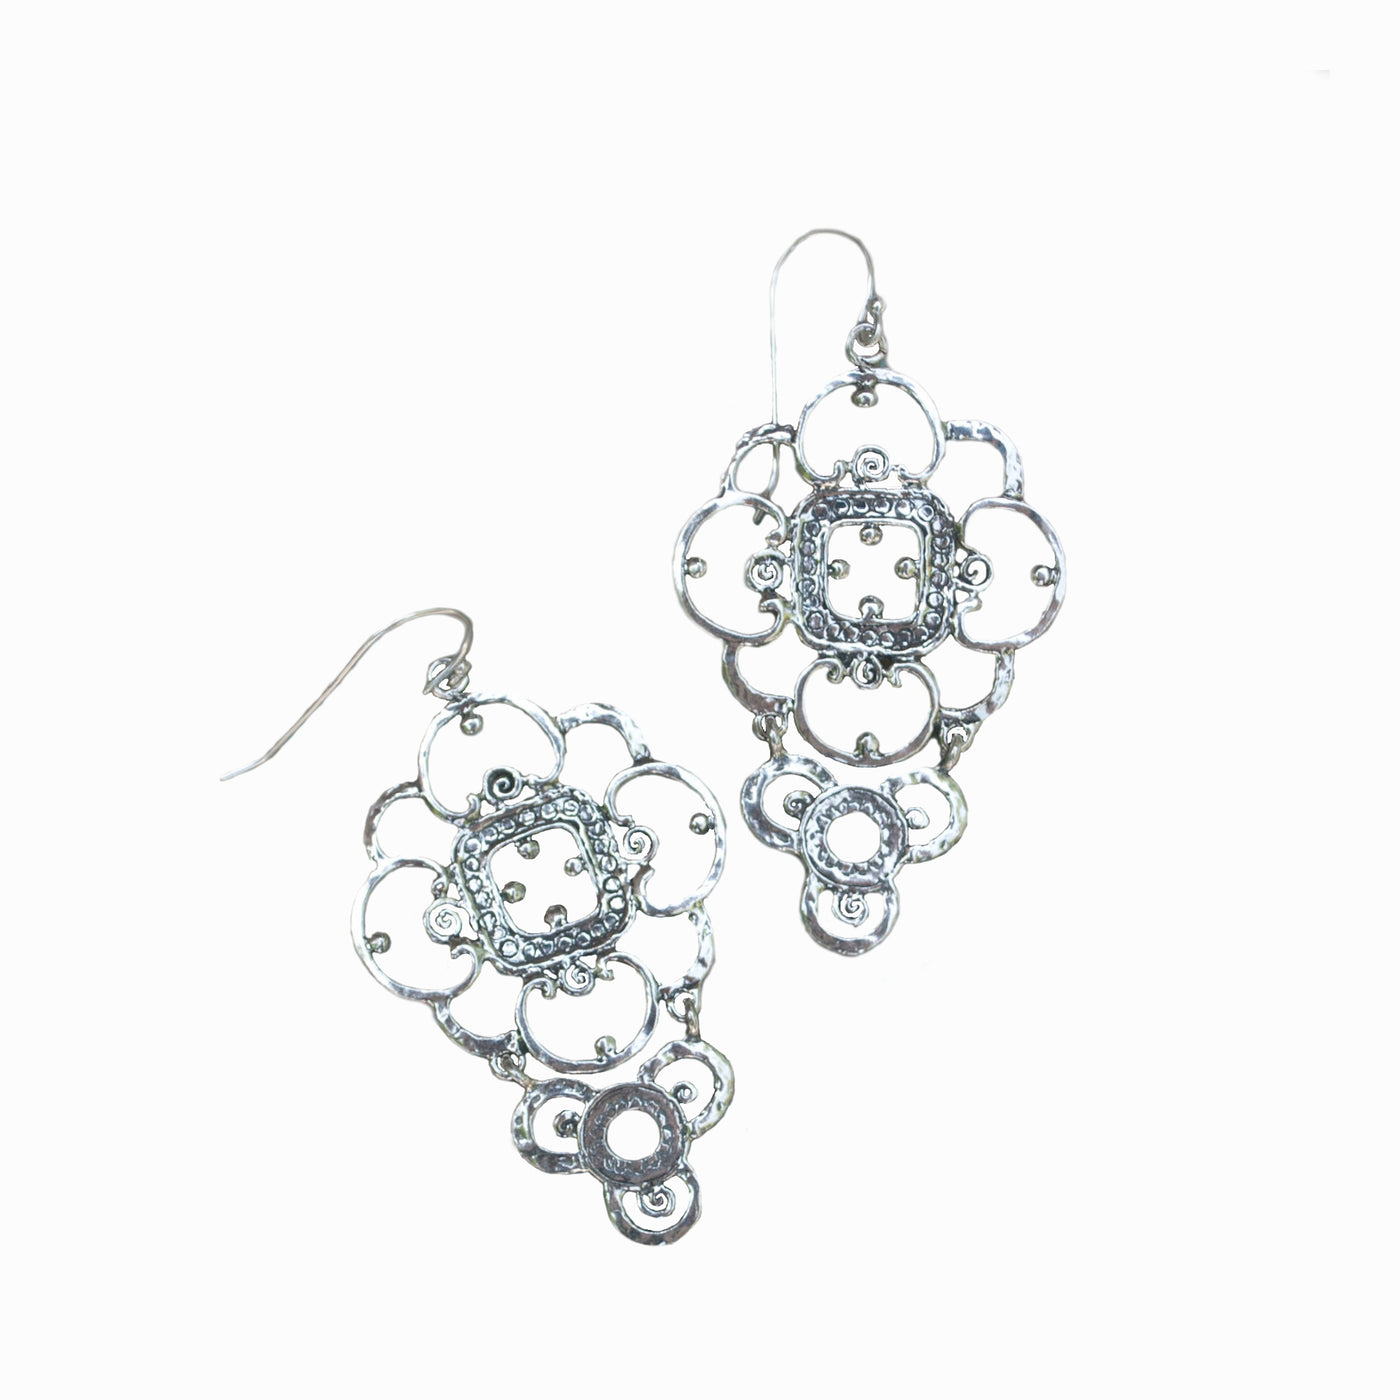 Sterling silver earrings with a lacey design. Artisan crafted with .925 quality sterling silver stamp. Dangle Earrings are 2 1/2" in length.